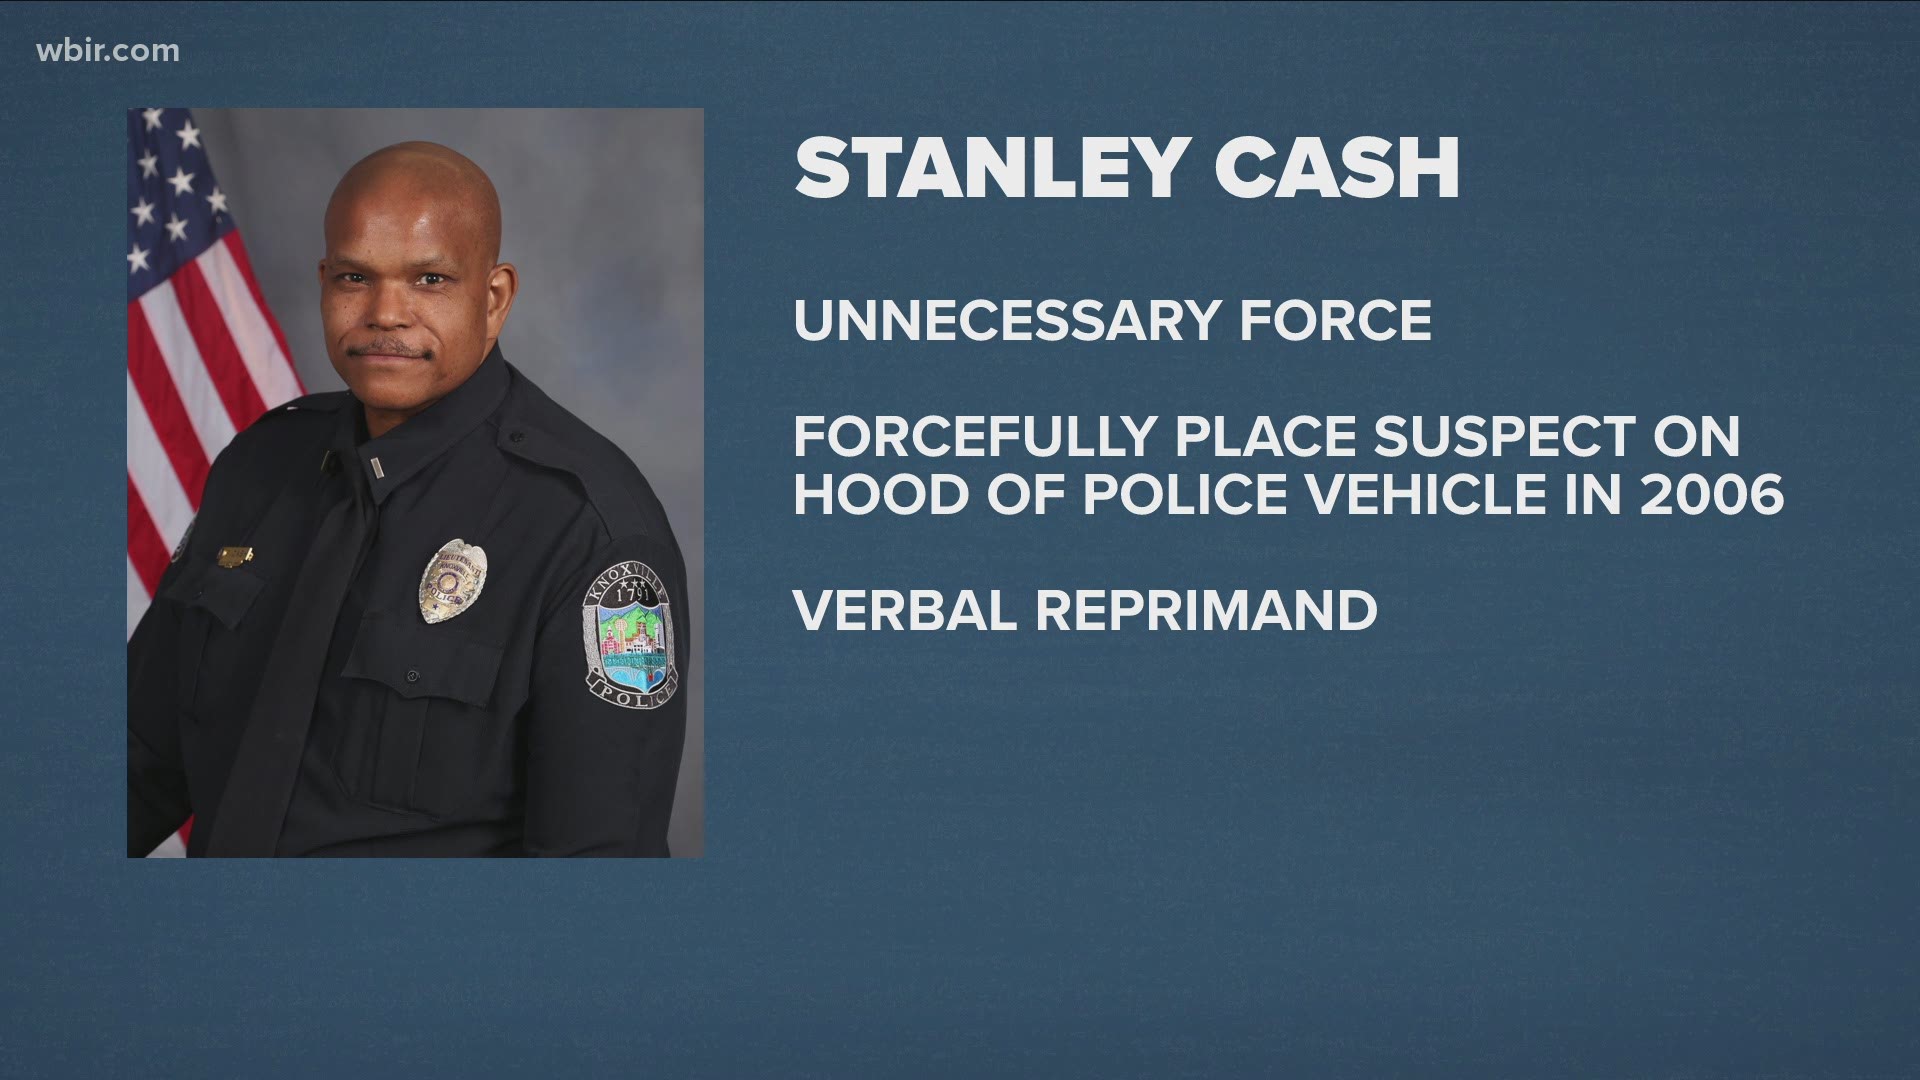 The report shows Cash received a verbal reprimand for unnecessary force in 2006.